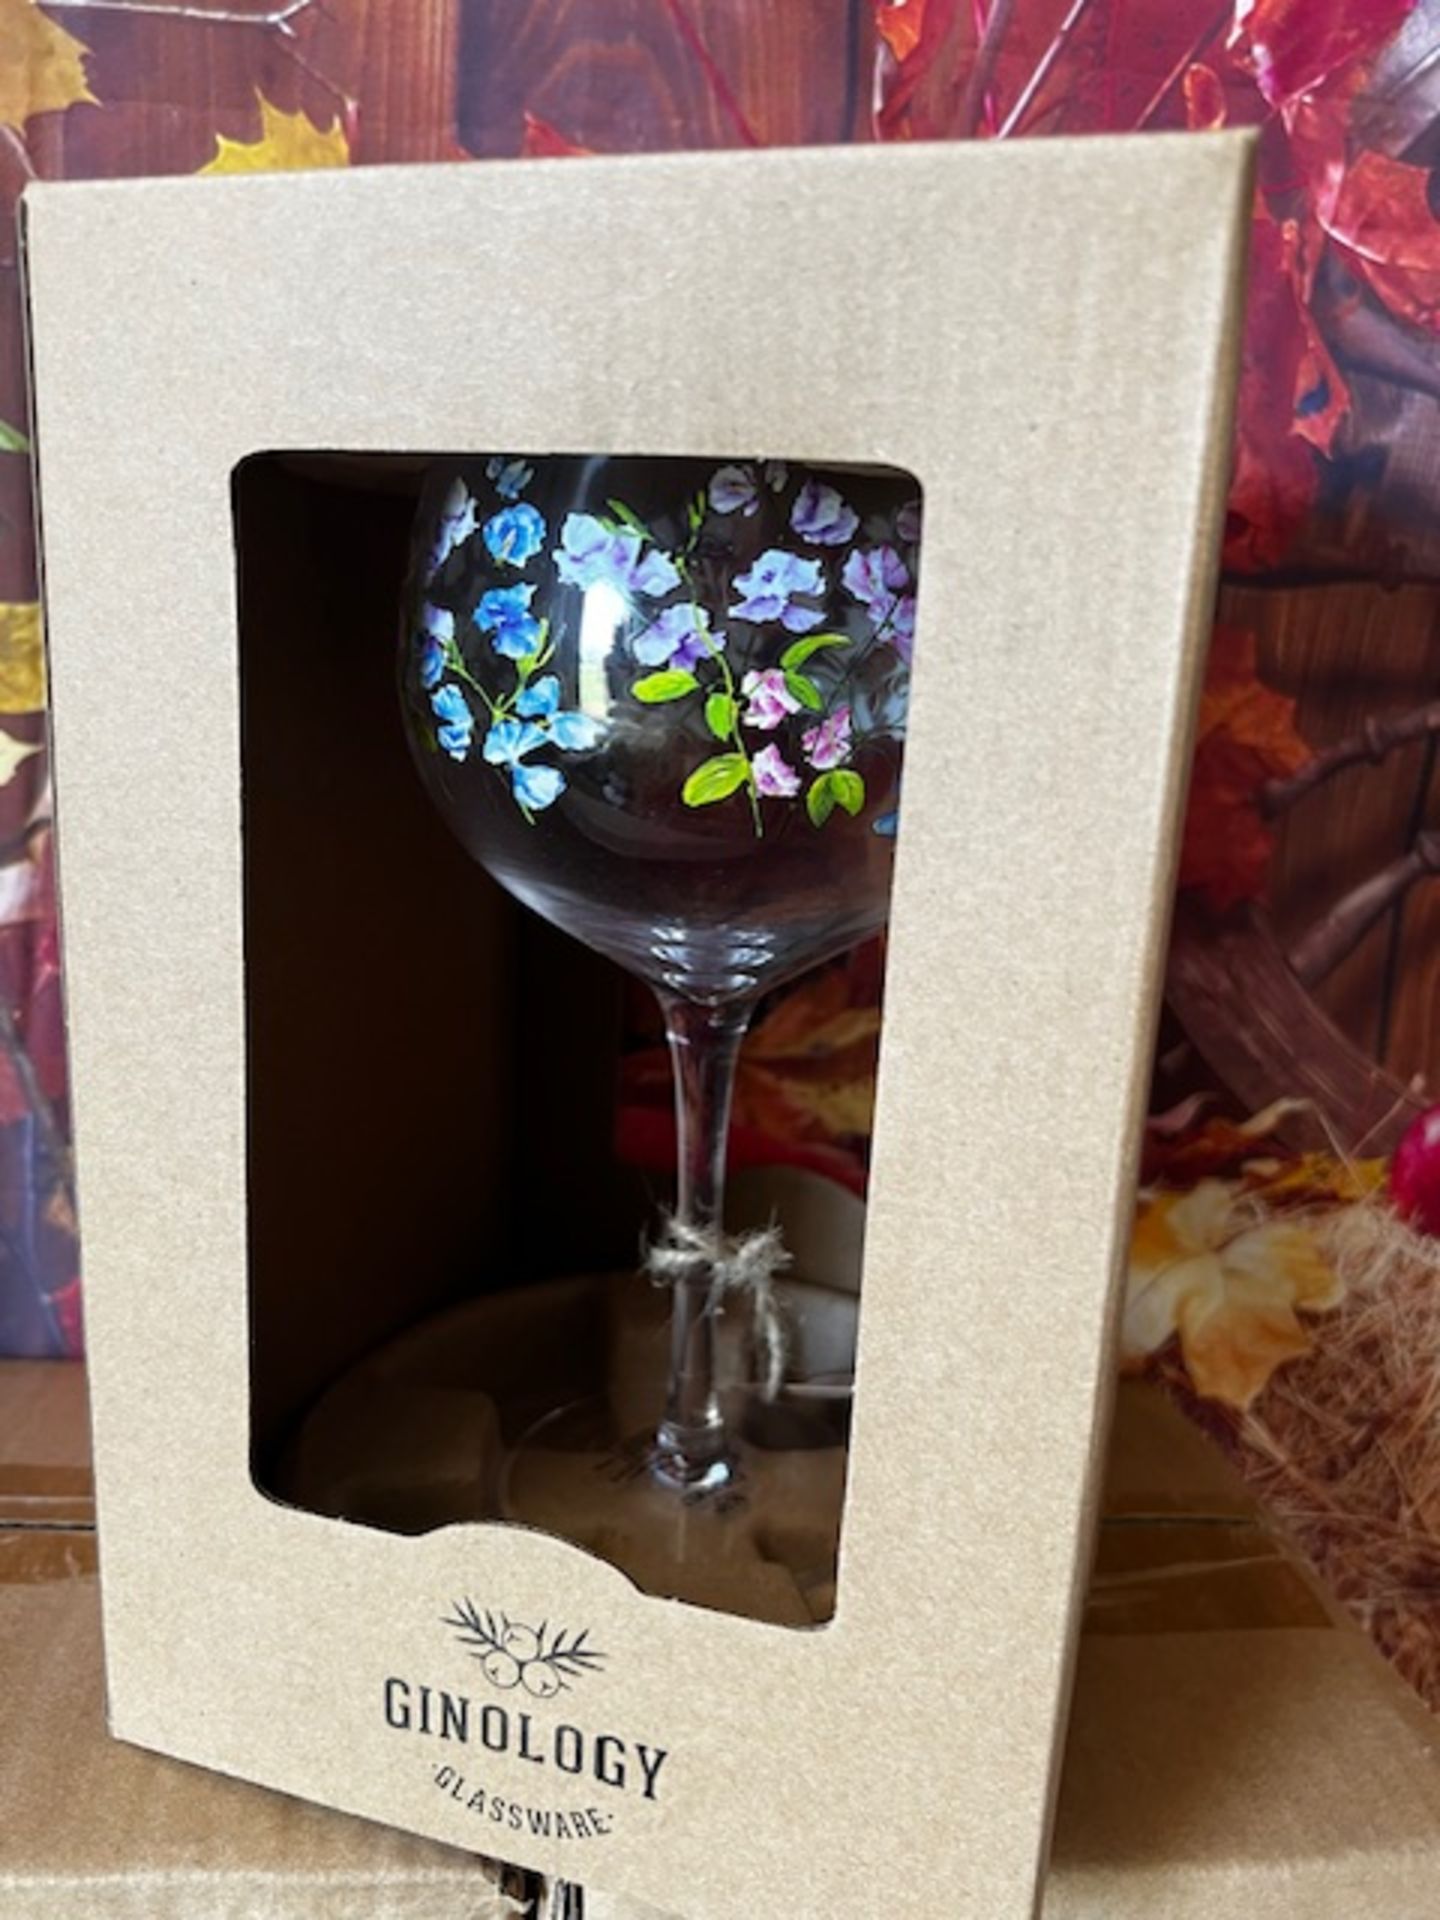 Gin Glass Hand Crafted By Ginology In Gift Box - Image 2 of 3